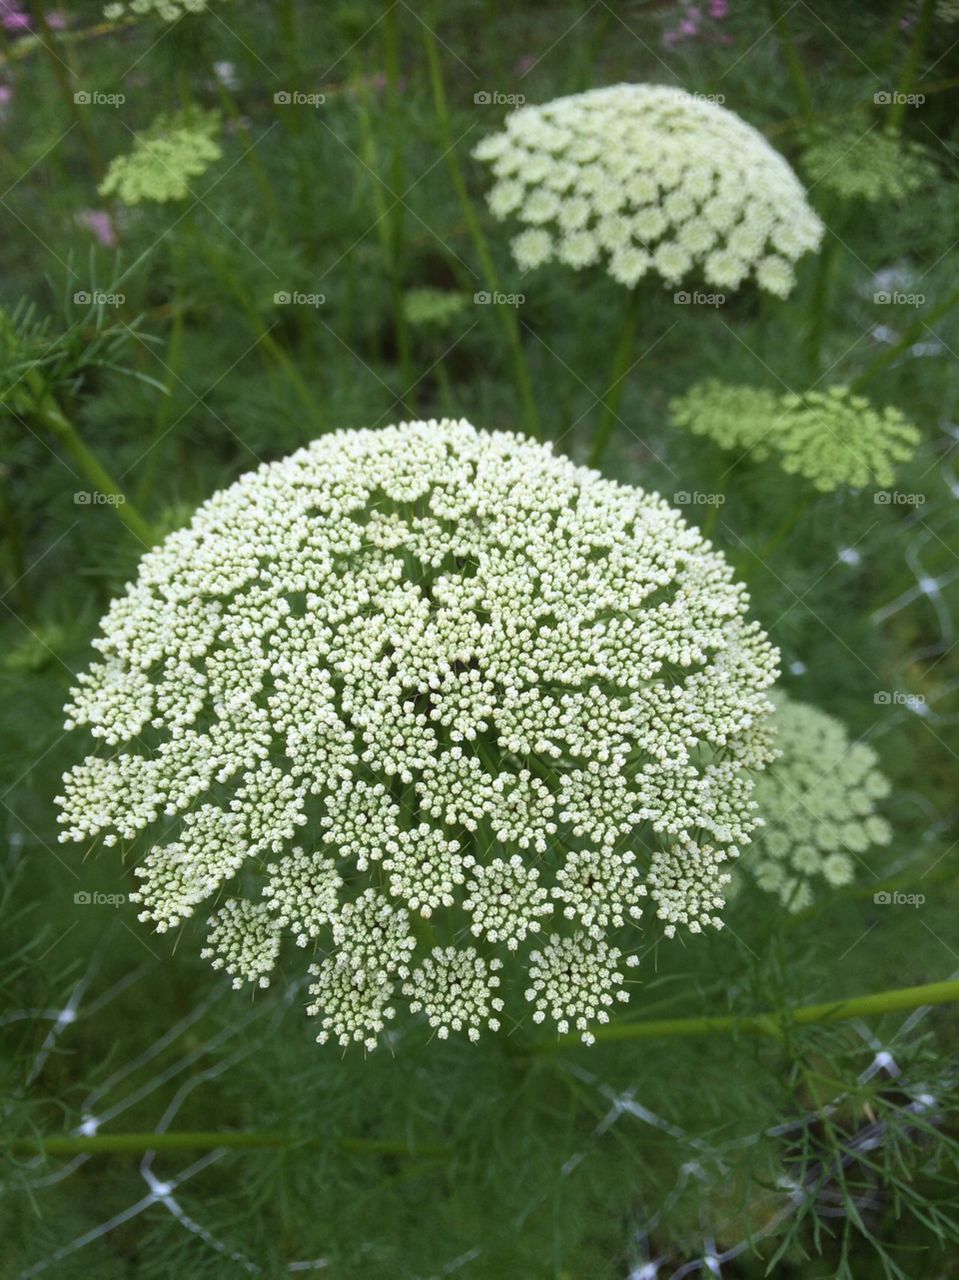 This dome of flowers is split into many starry umbels of tiny white flowers, a variety of ammi 